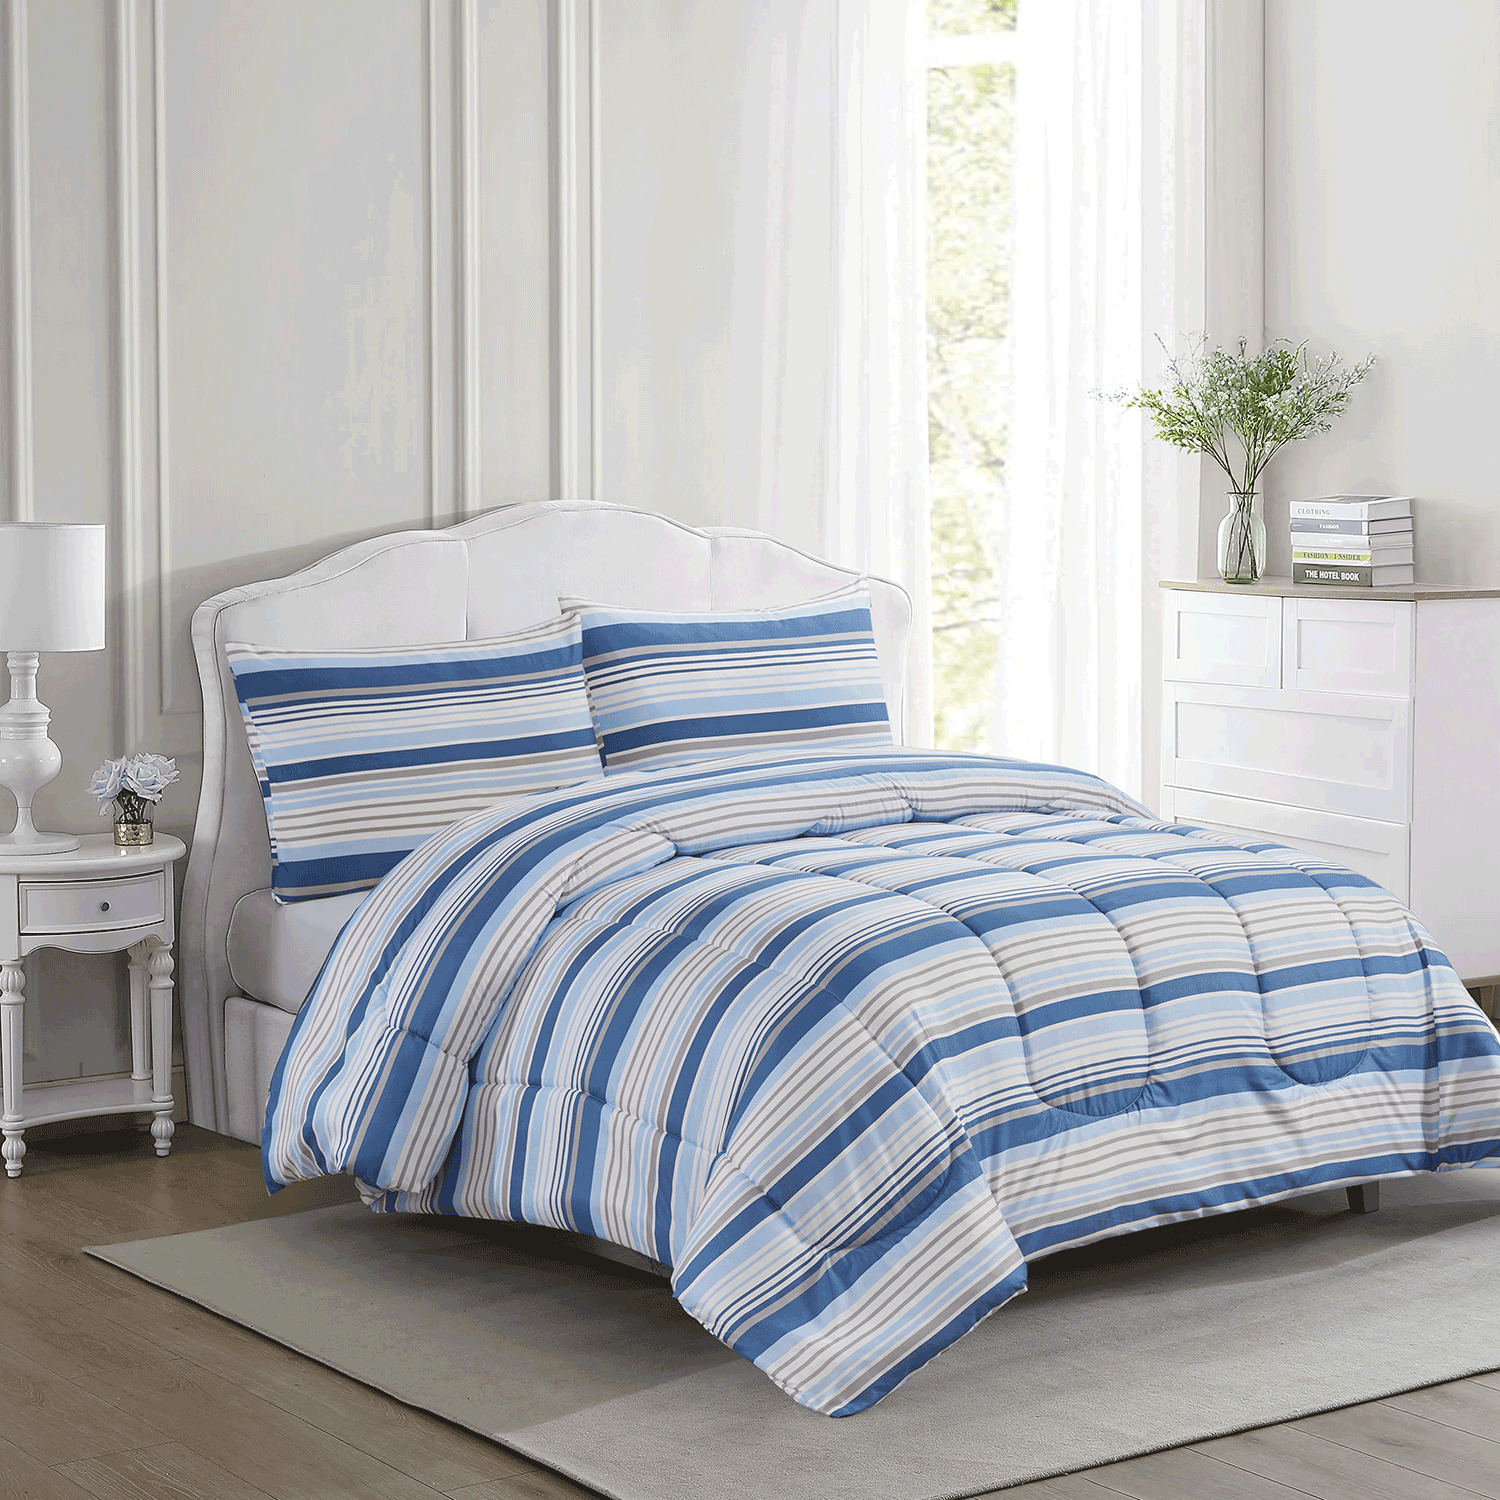 Trapeze - Quilted comforter set, 3 pcs - Modern stripes